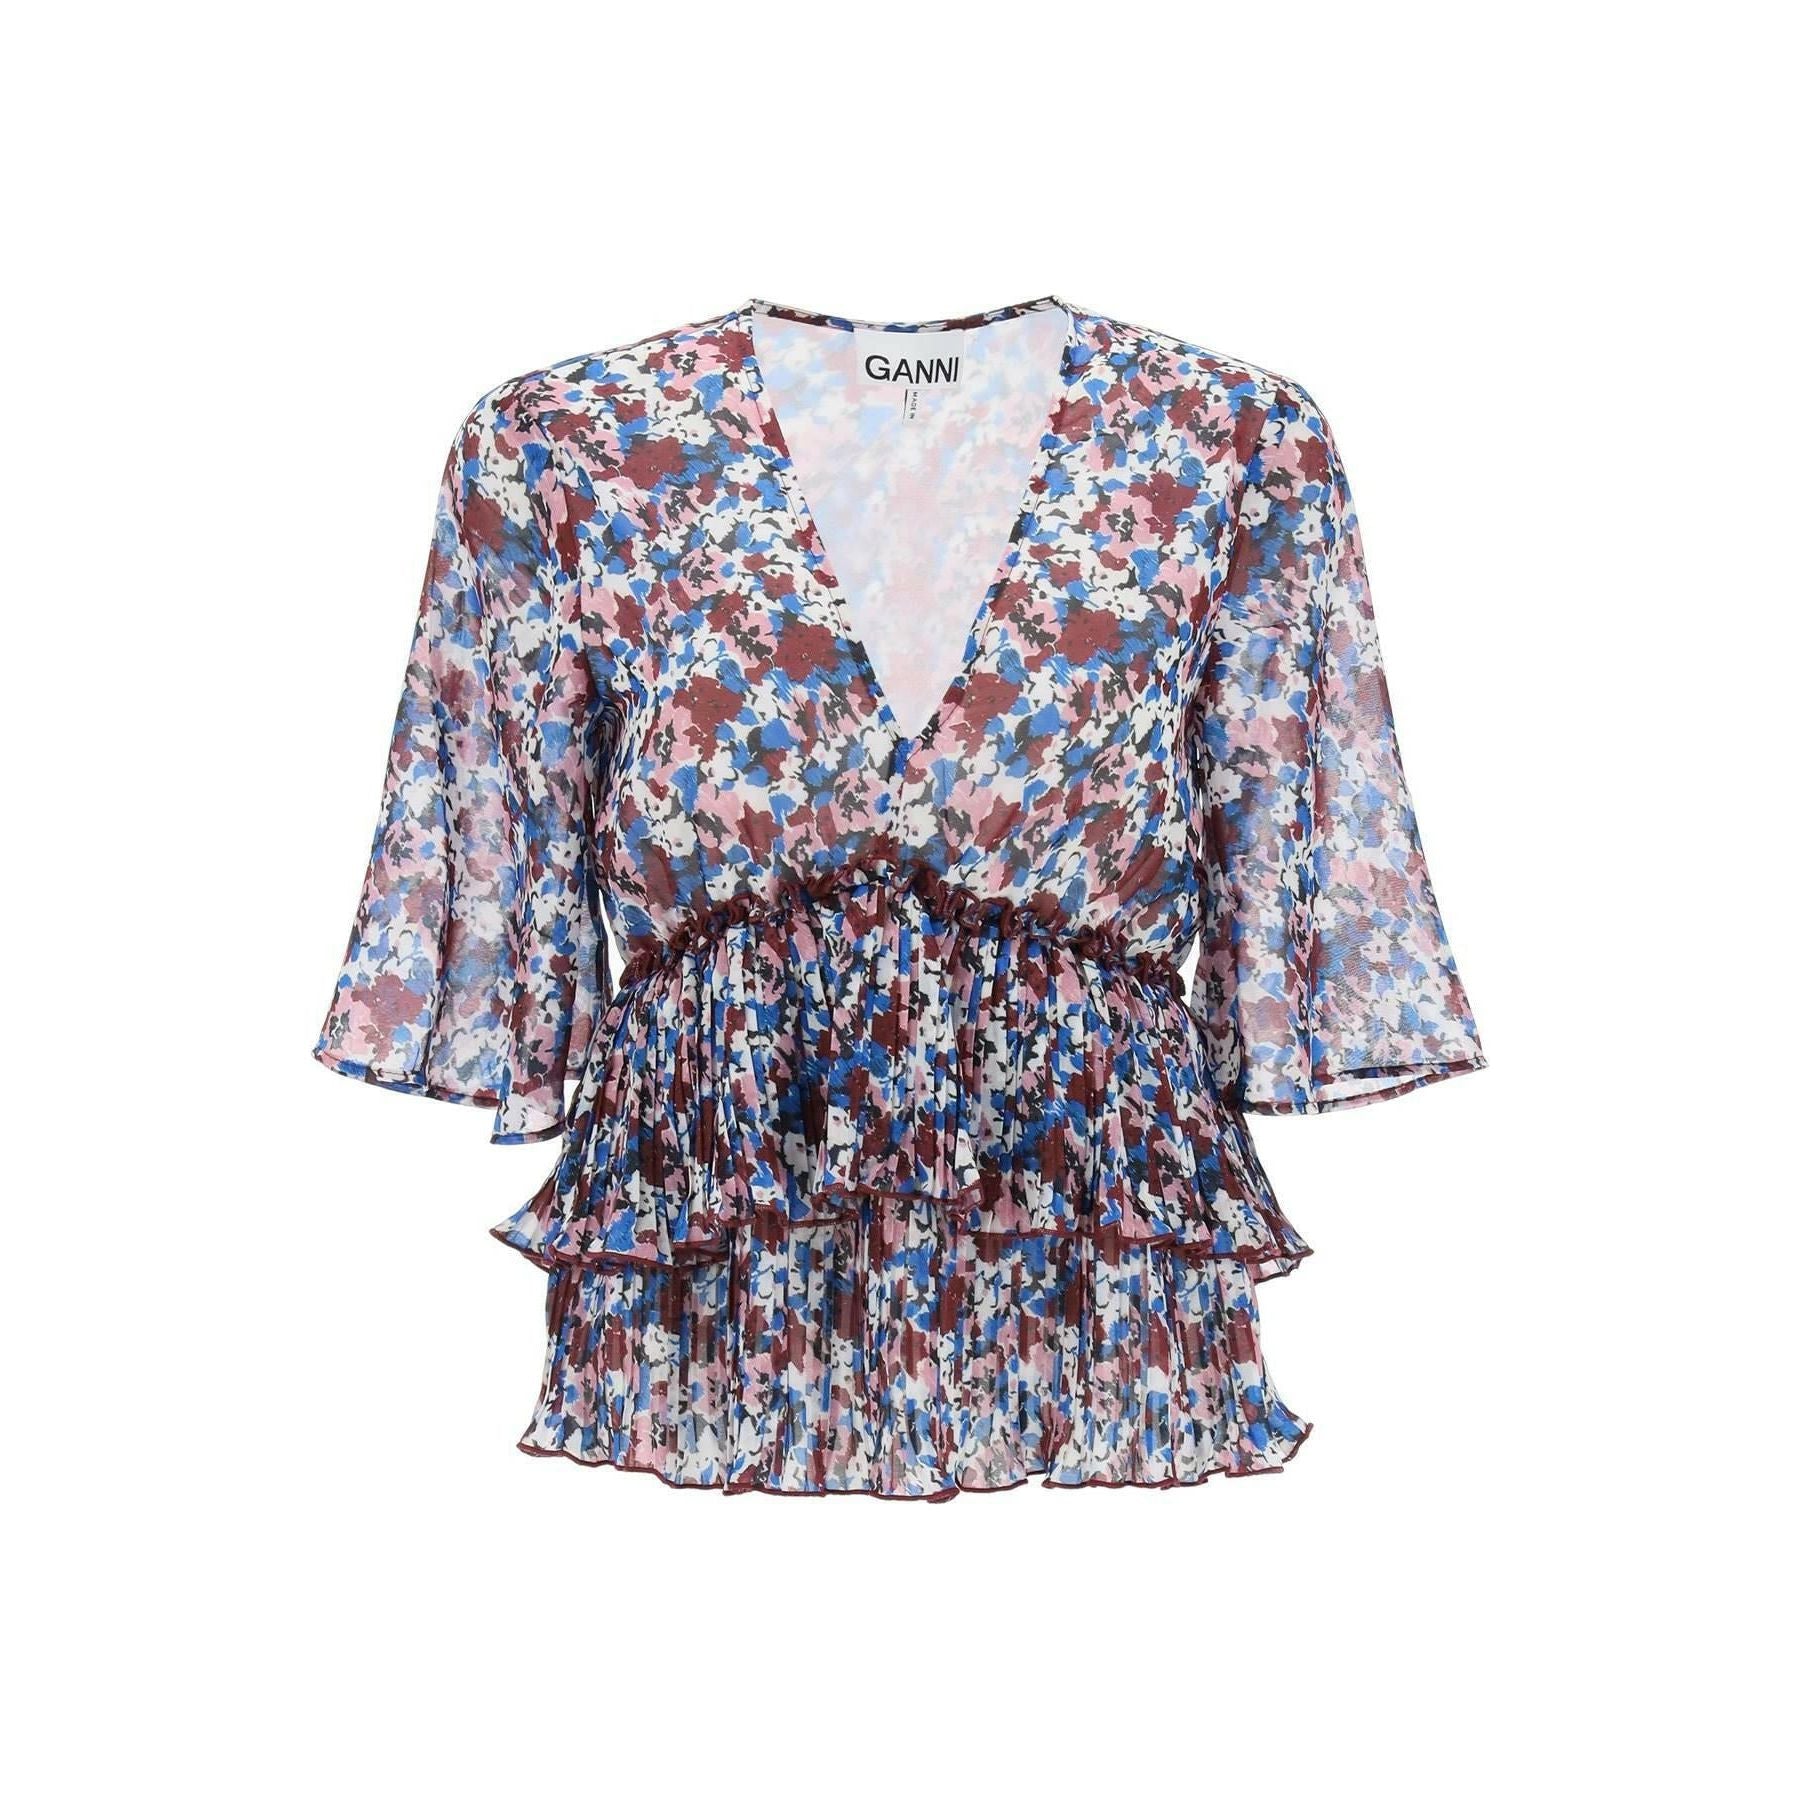 Pleated Blouse With Floral Motif GANNI JOHN JULIA.